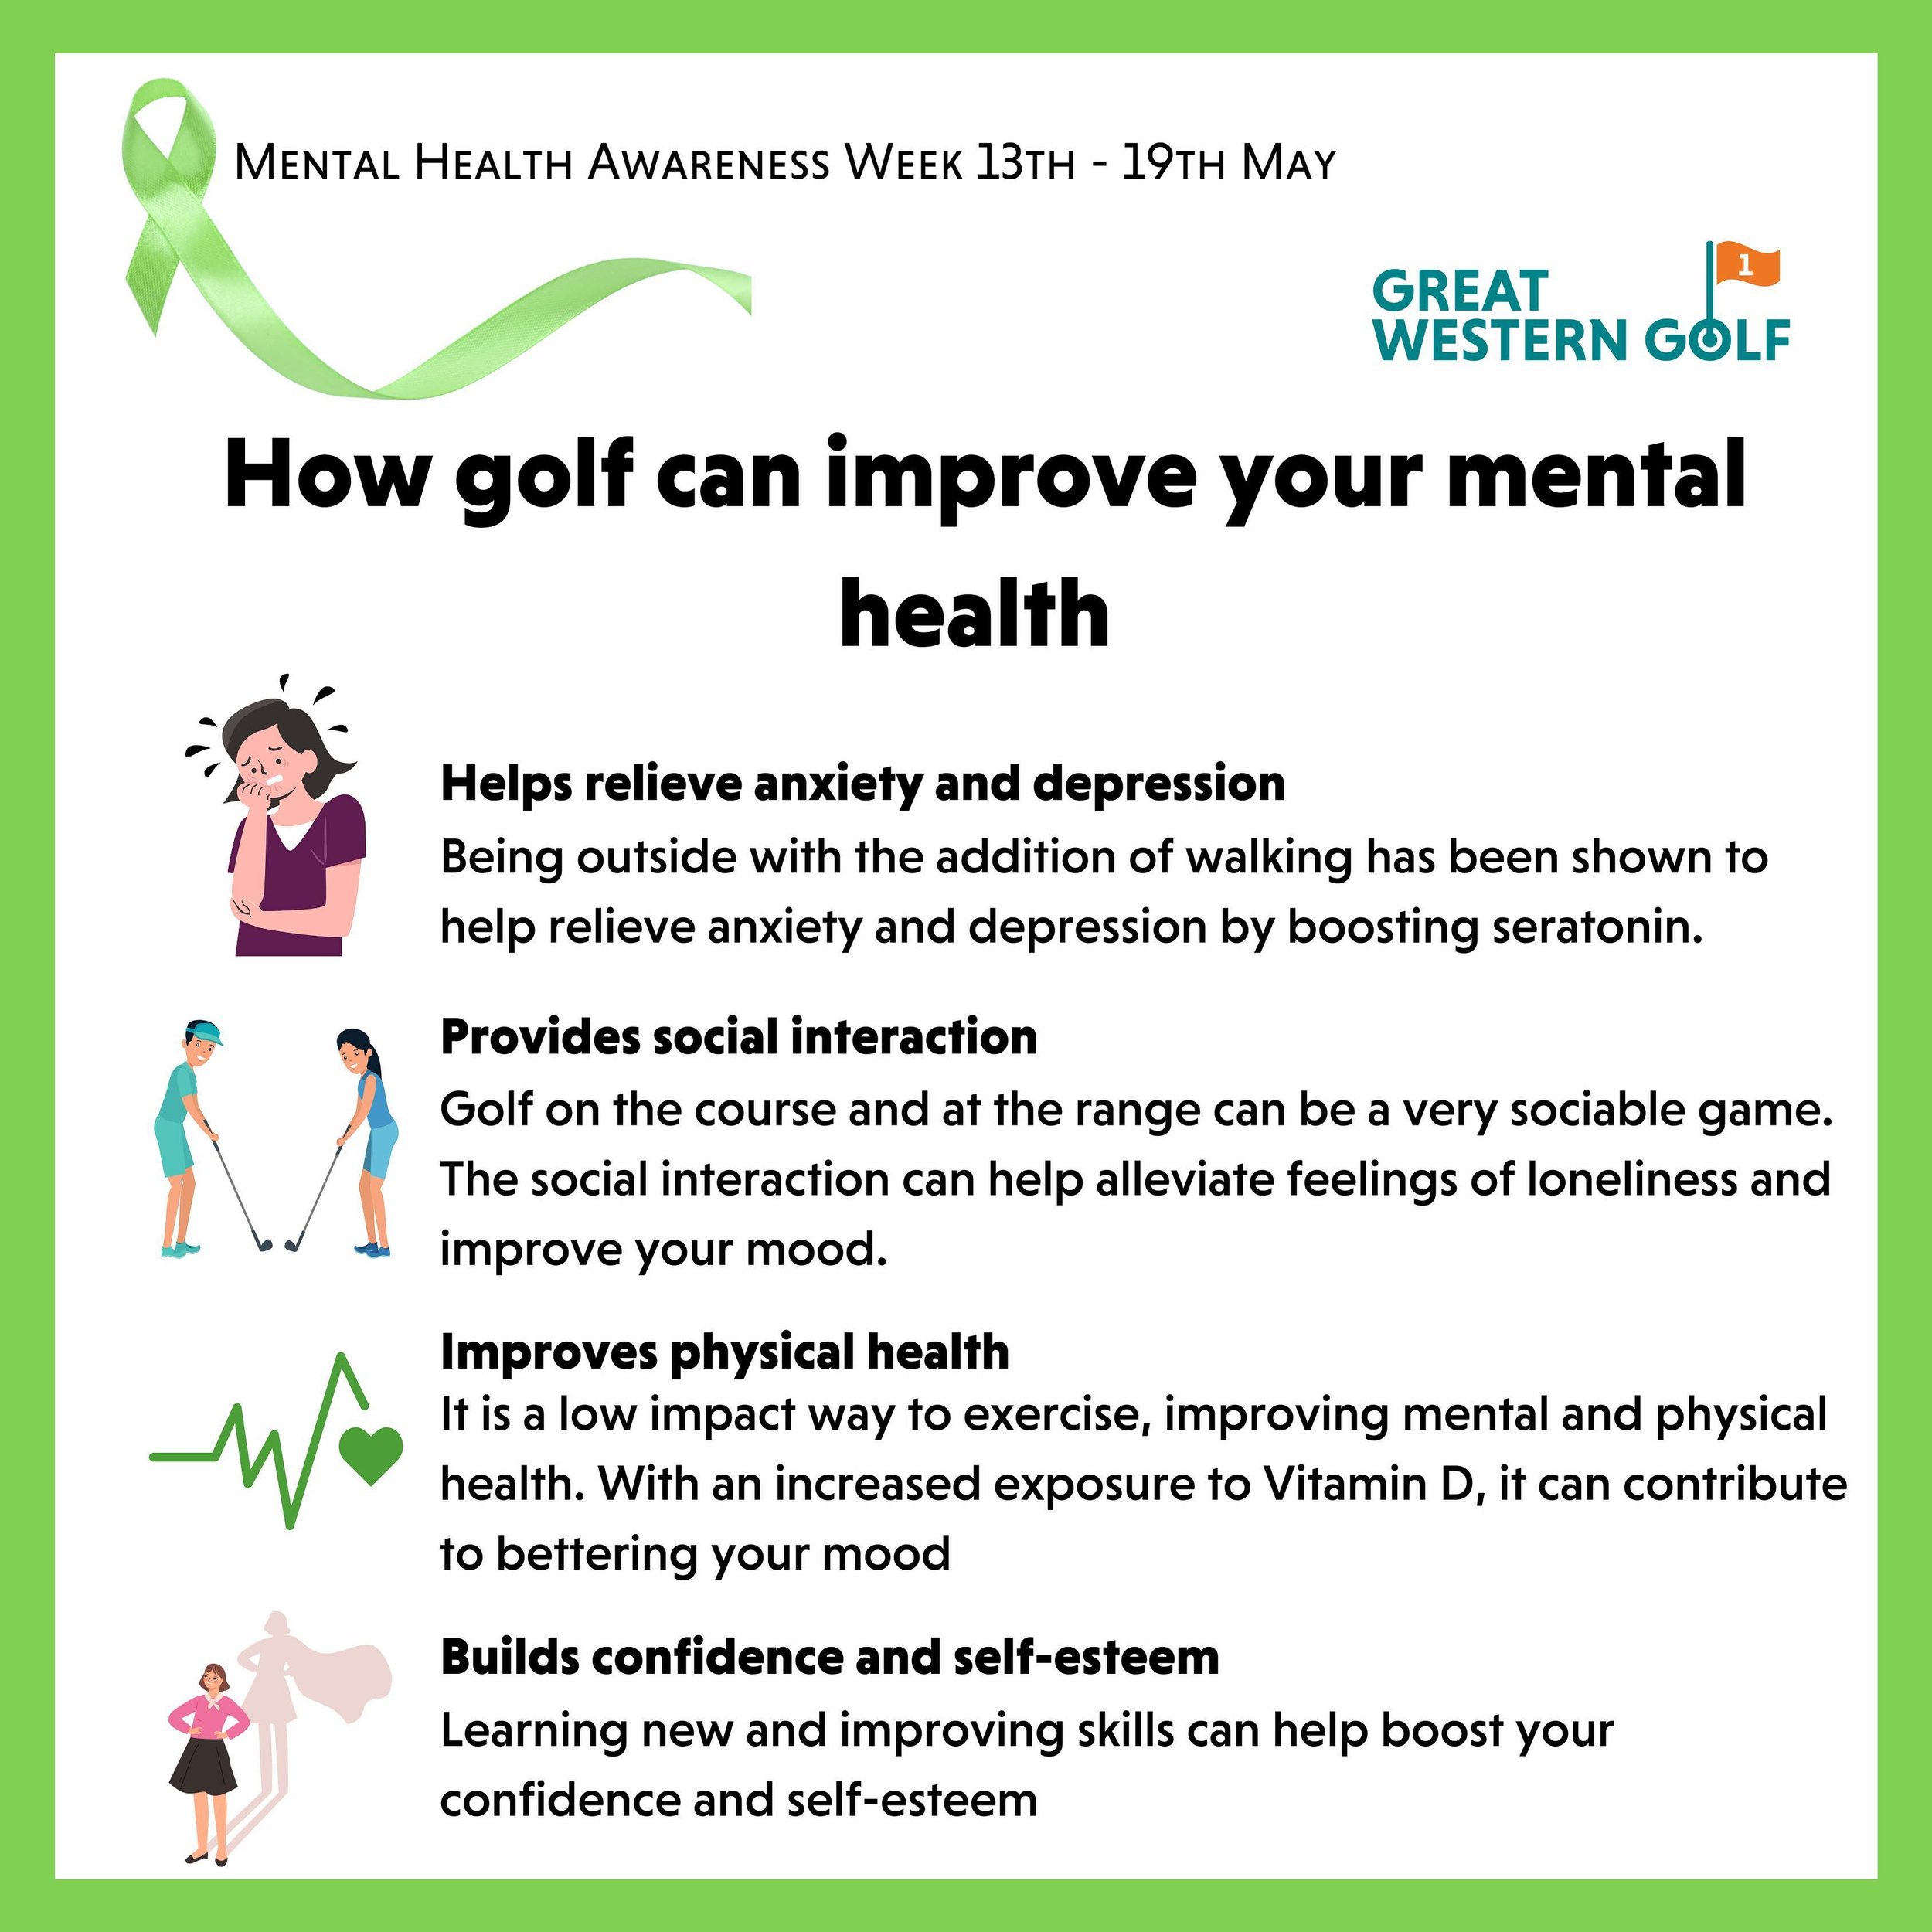 💚 MENTAL HEALTH AWARENESS WEEK 💚
As mental health awareness week draws to a close, we wanted to recognise just how important your mental health is. Each year, 1 in 3 people in Scotland will face mental health problems. And here at Great Western Gol